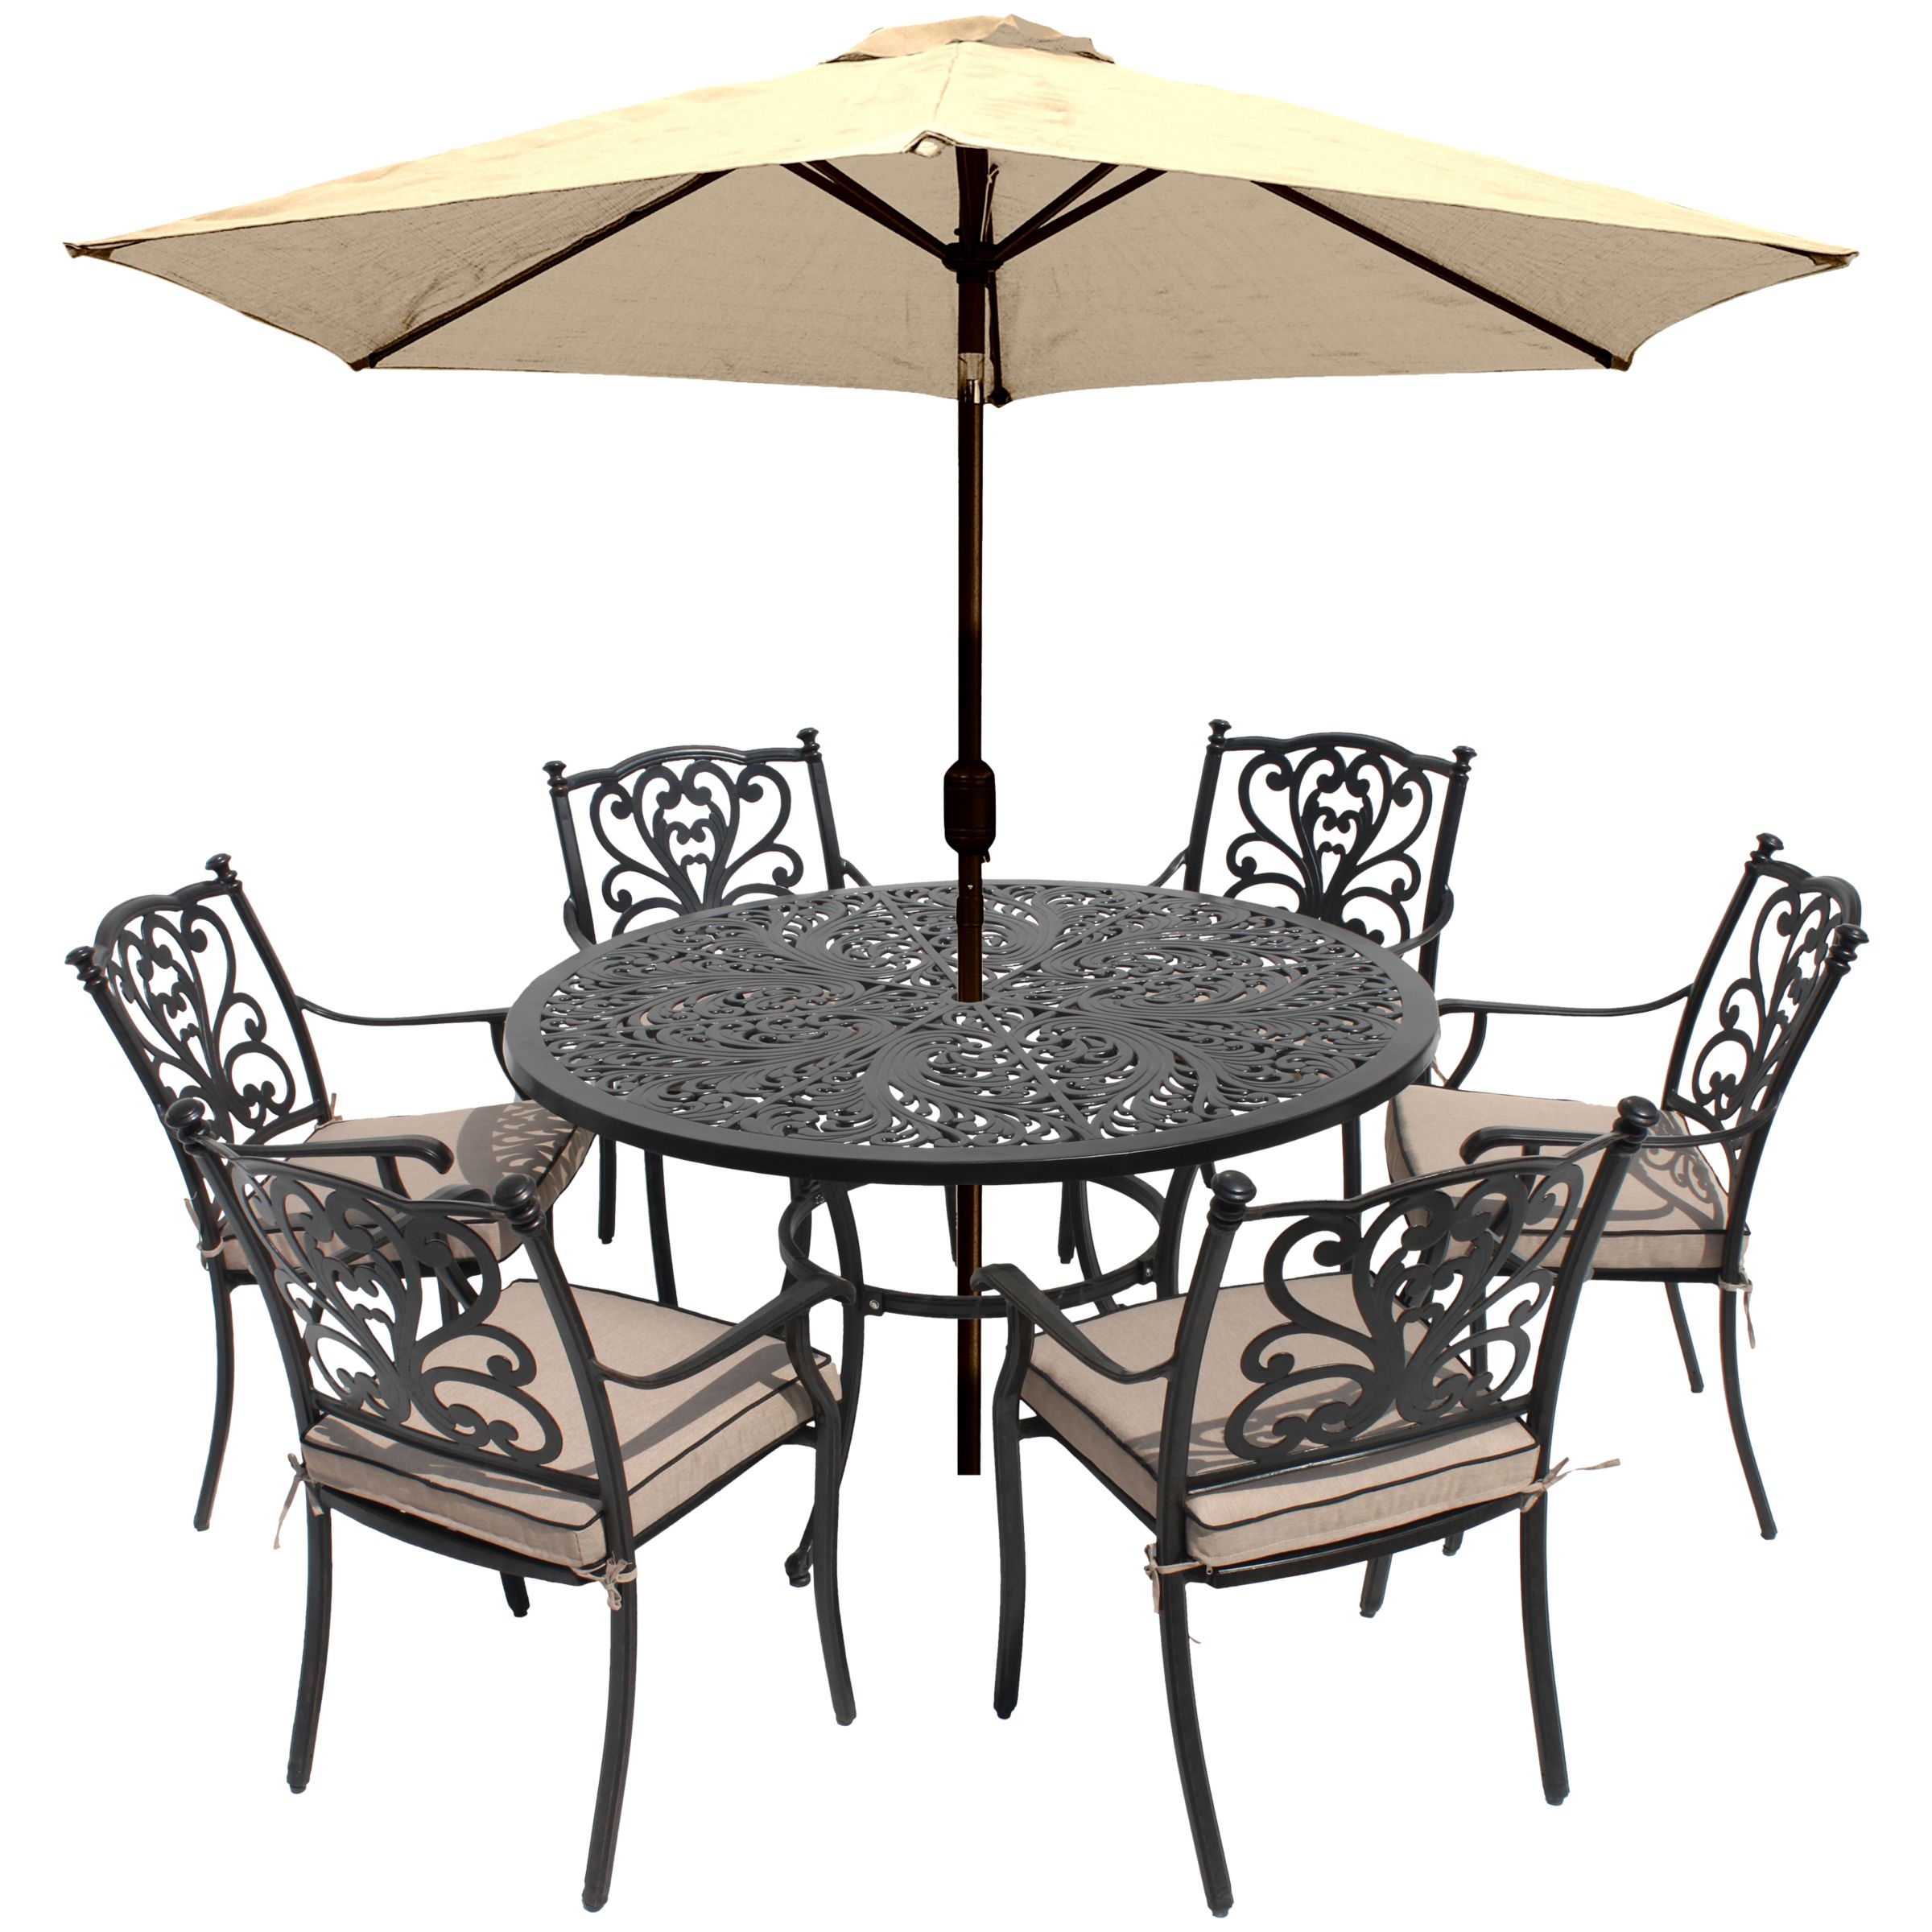 LG Outdoor Devon 6 Seater Garden Dining Table and Chairs ...